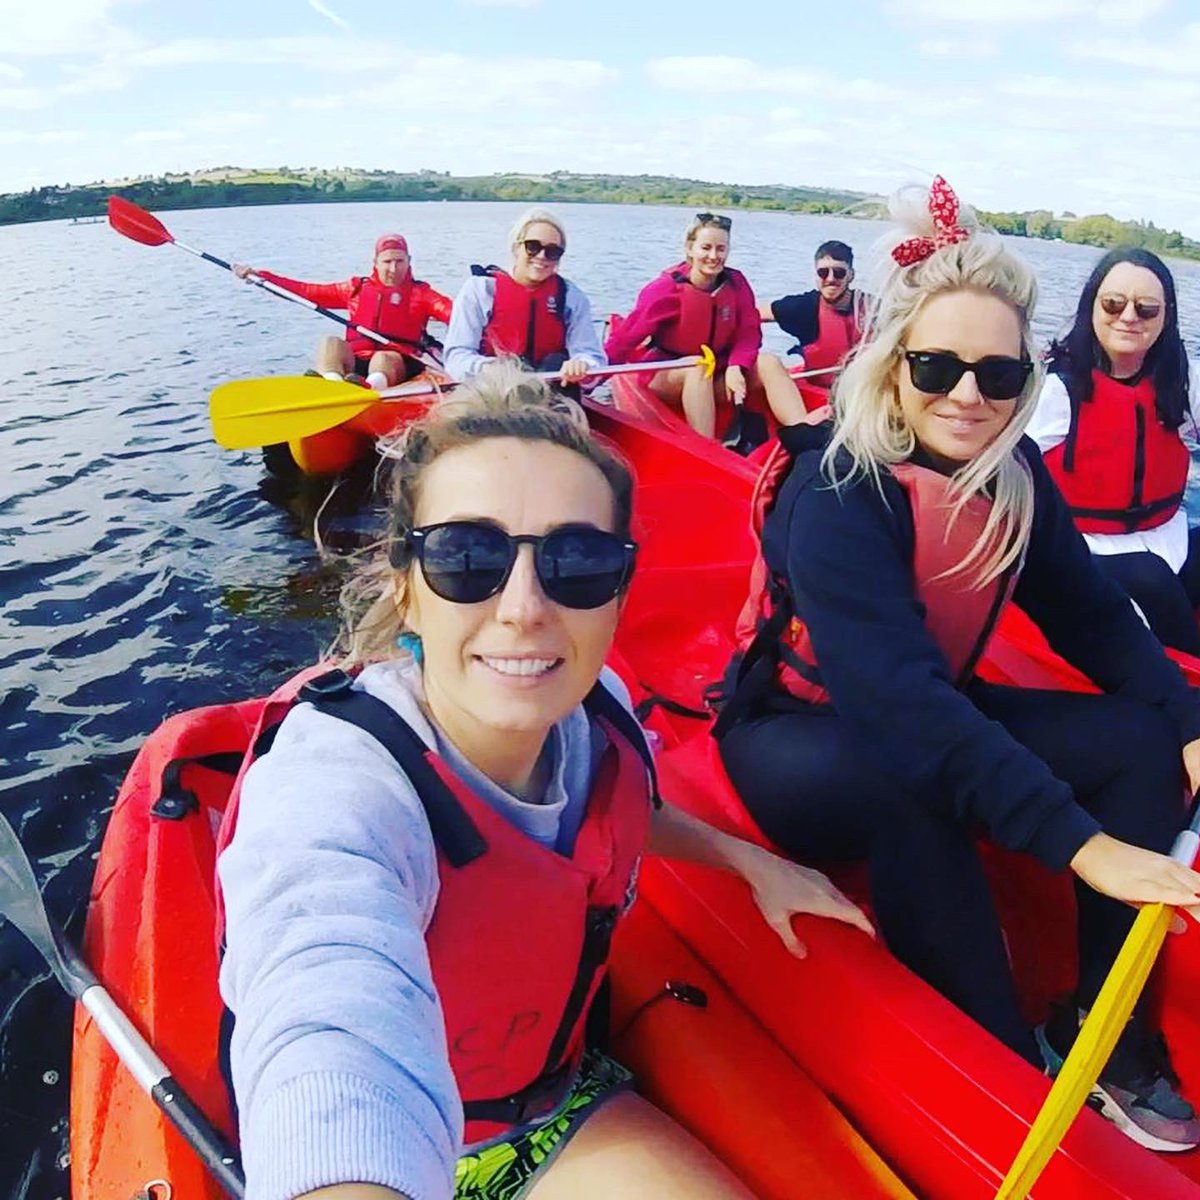 Great day out in #llangorselake #lakeactivities ⛰💦🚣‍♀️ #SundayFunday 😊